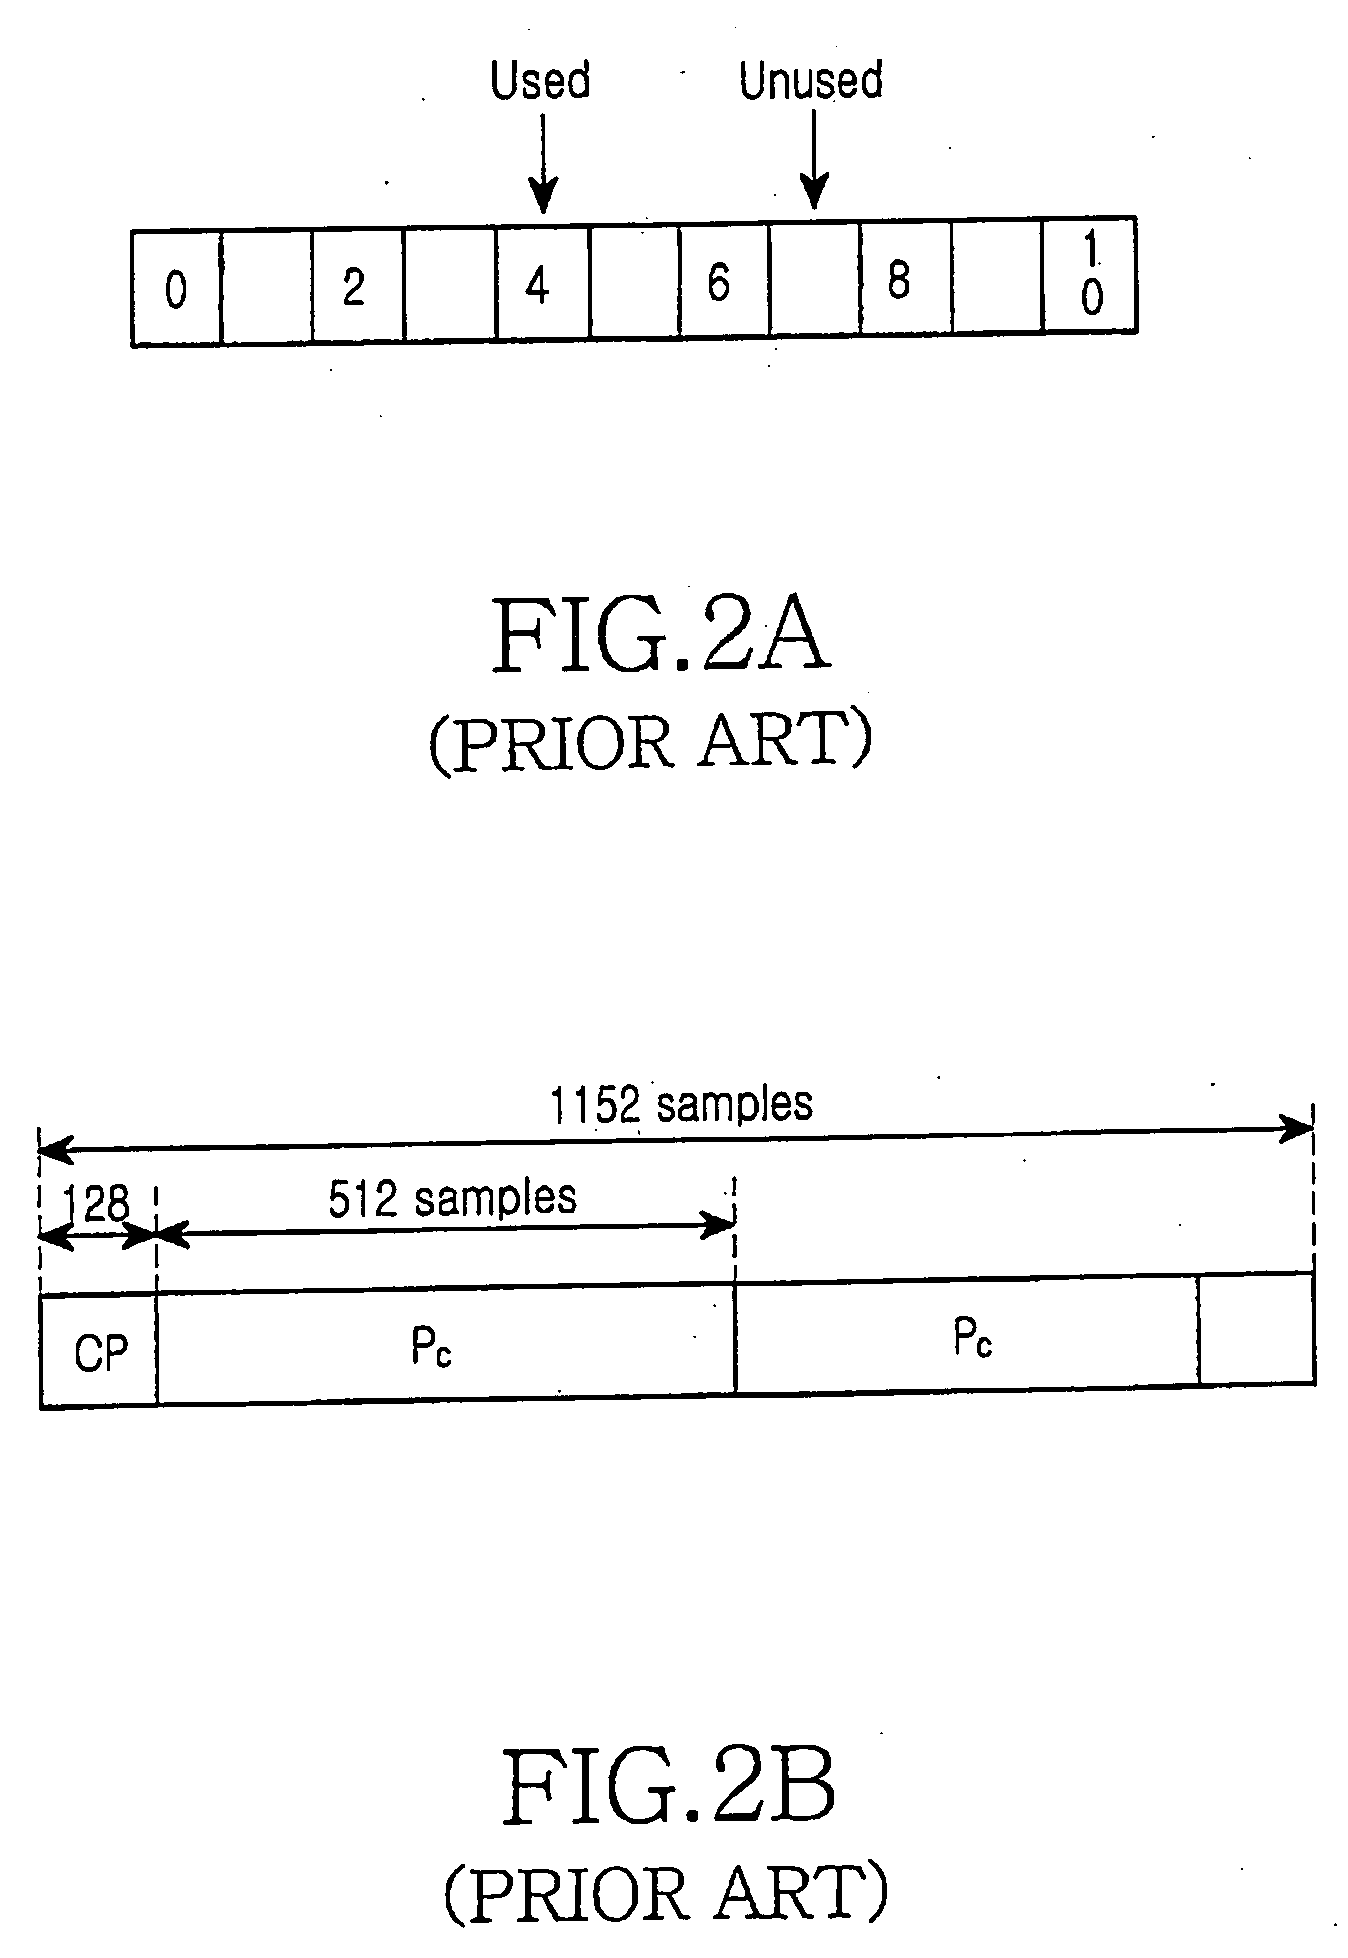 Apparatus and method for cell acquisition and downlink synchronization acquisition in a wireless communication system